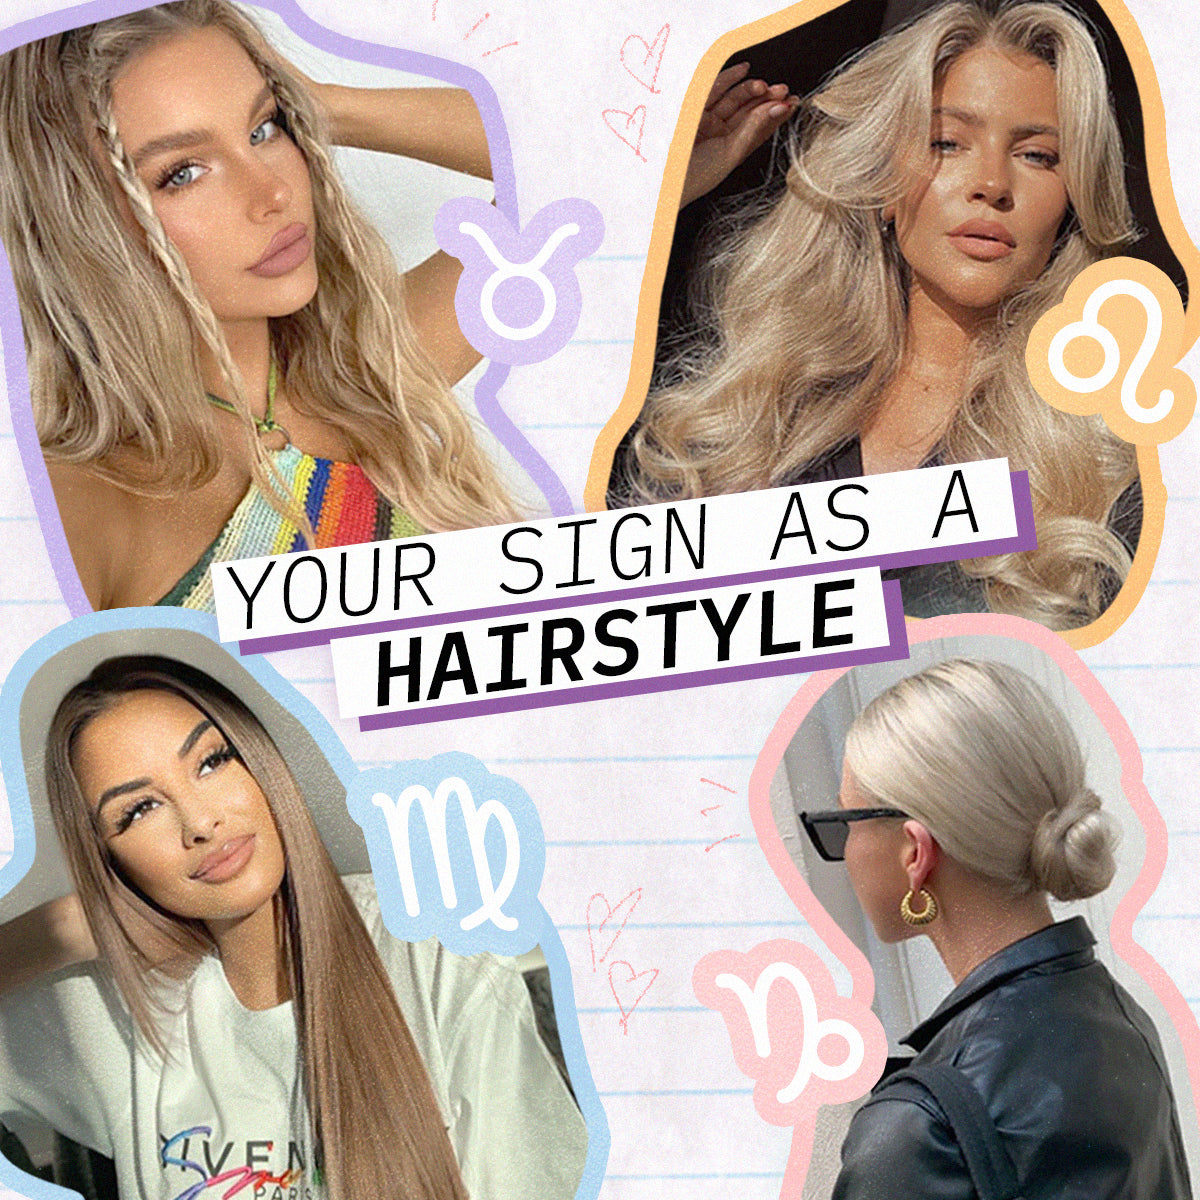 Discover Your Signature Hairstyle Based on Your Zodiac Sign image